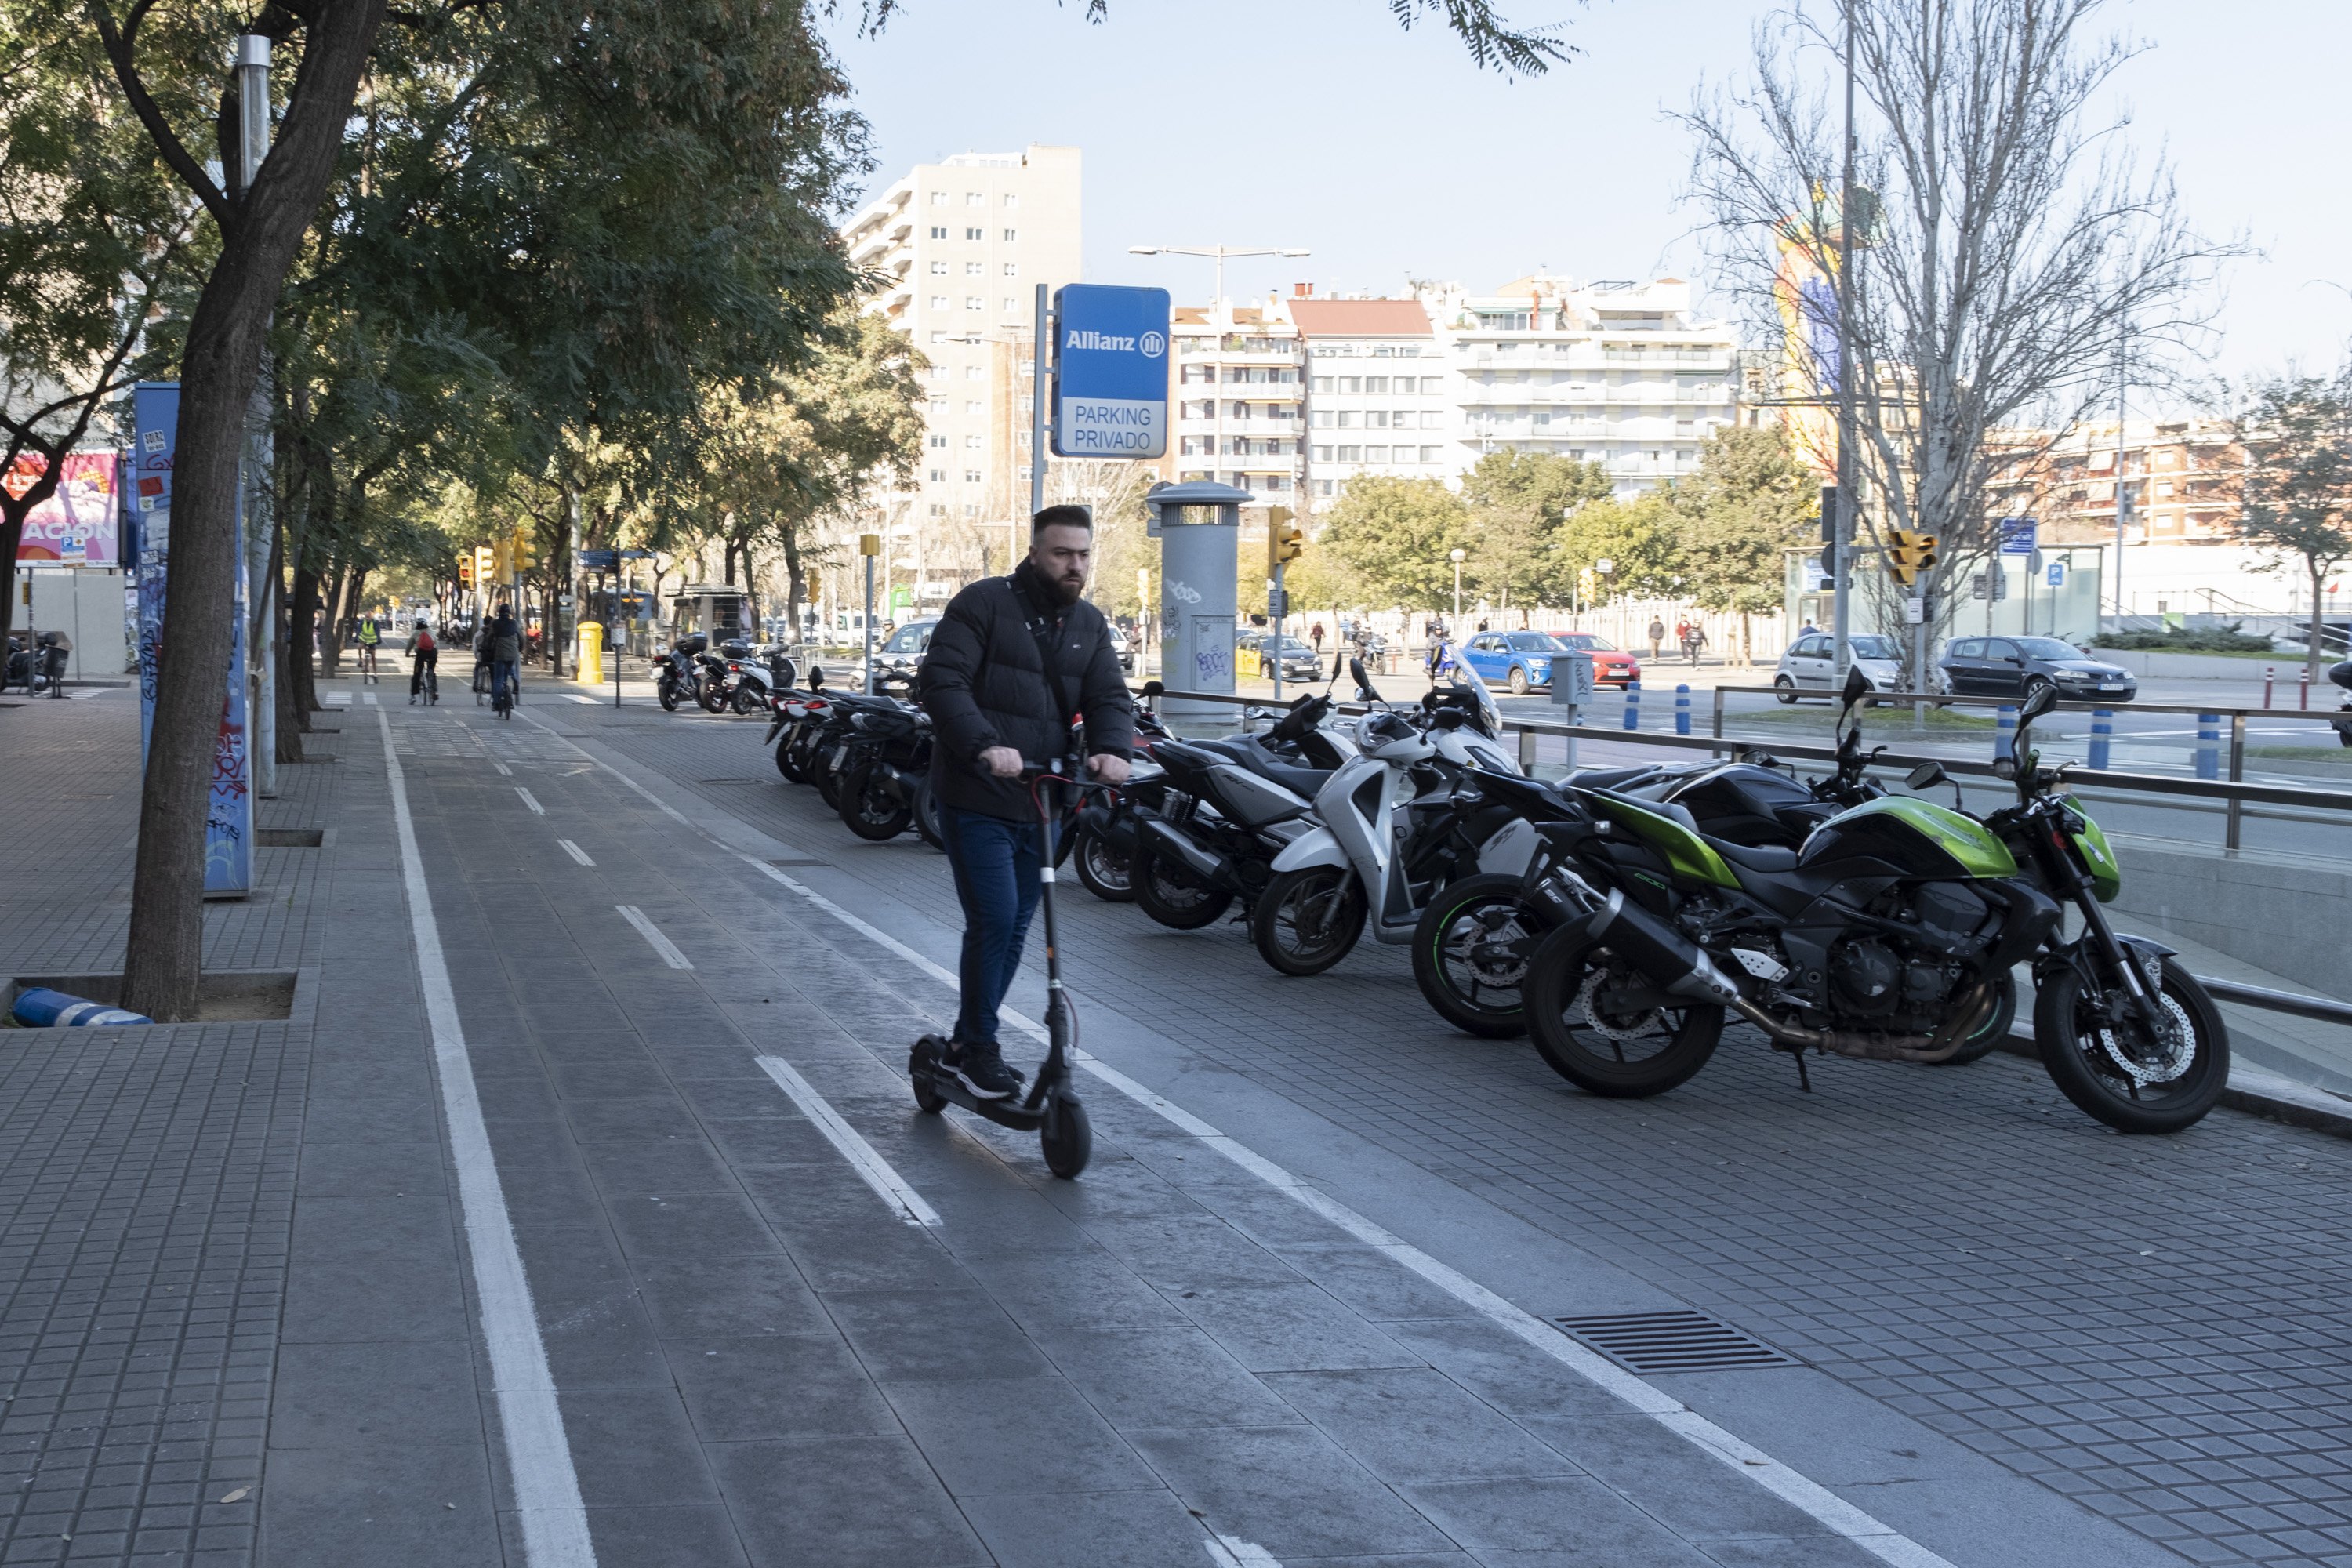 99% of e-scooters in Barcelona exceed the speed limit in pavement bike lanes